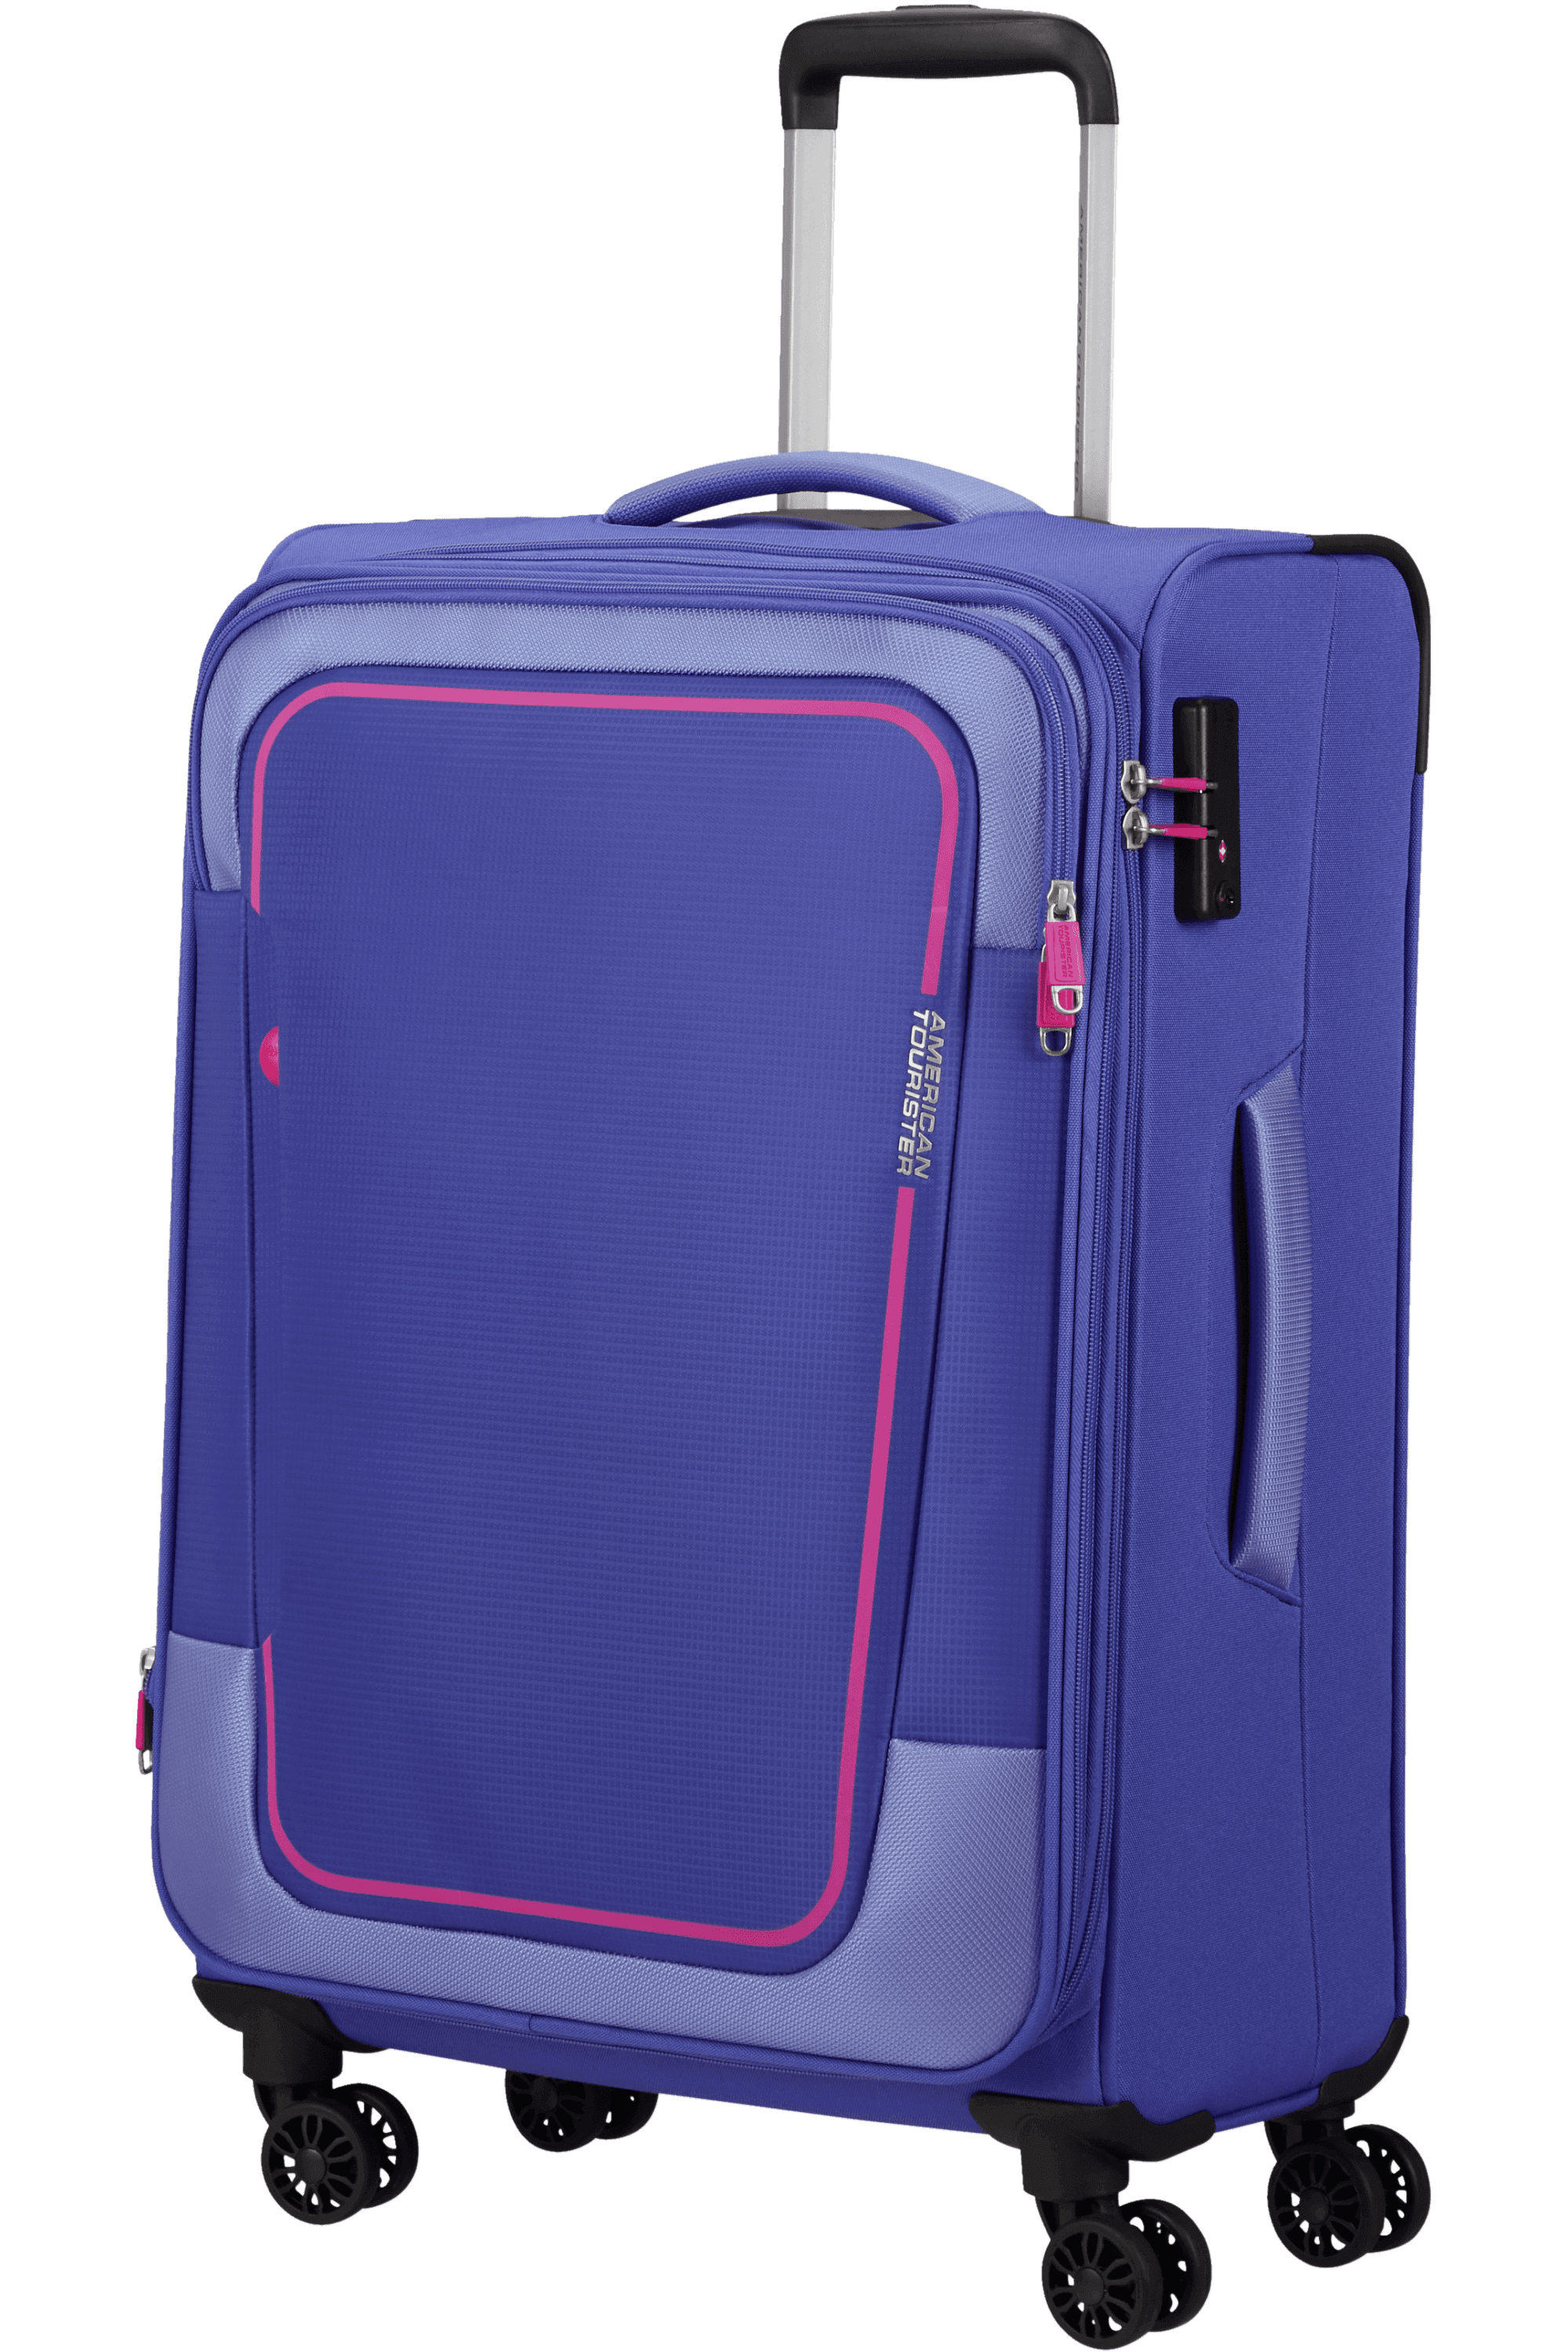 AMERICAN TOURISTER IQ Backpack Laptop bag for Business Professional and  College Student with Durable Material, Pockets